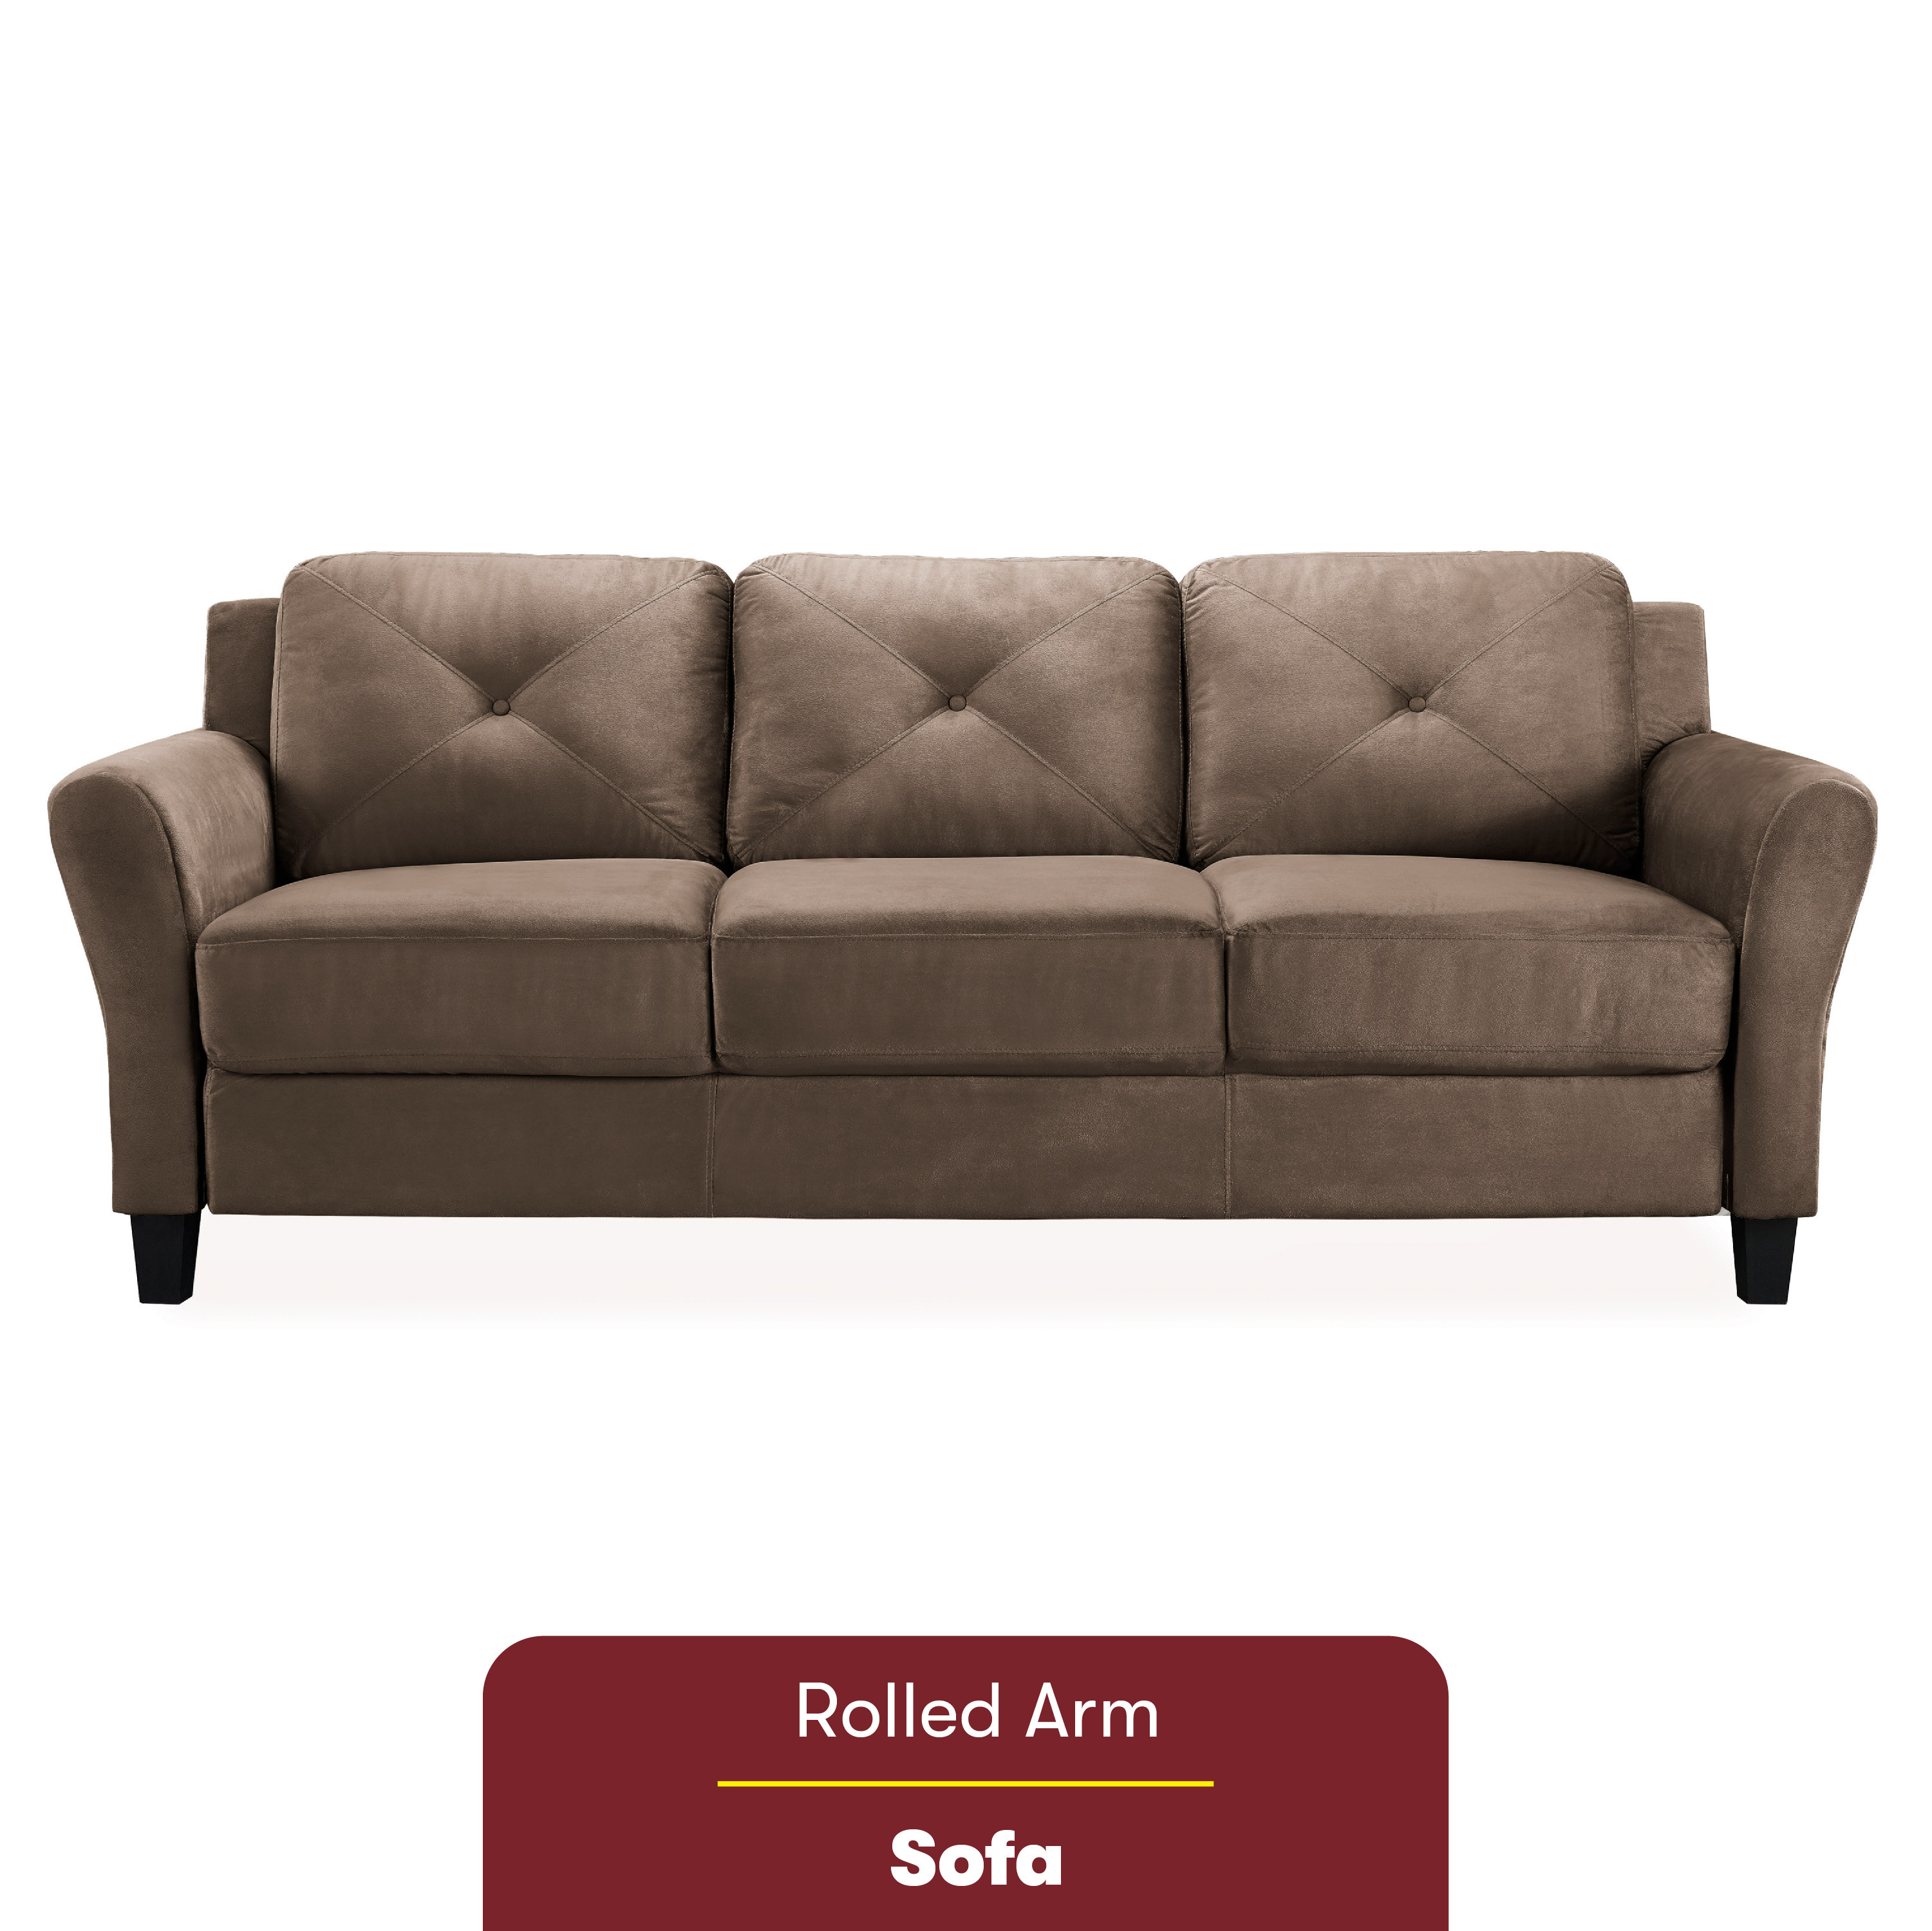 Lifestyle Solutions Taryn Traditional Sofa with Rolled Arms, Brown Fabric - image 3 of 12